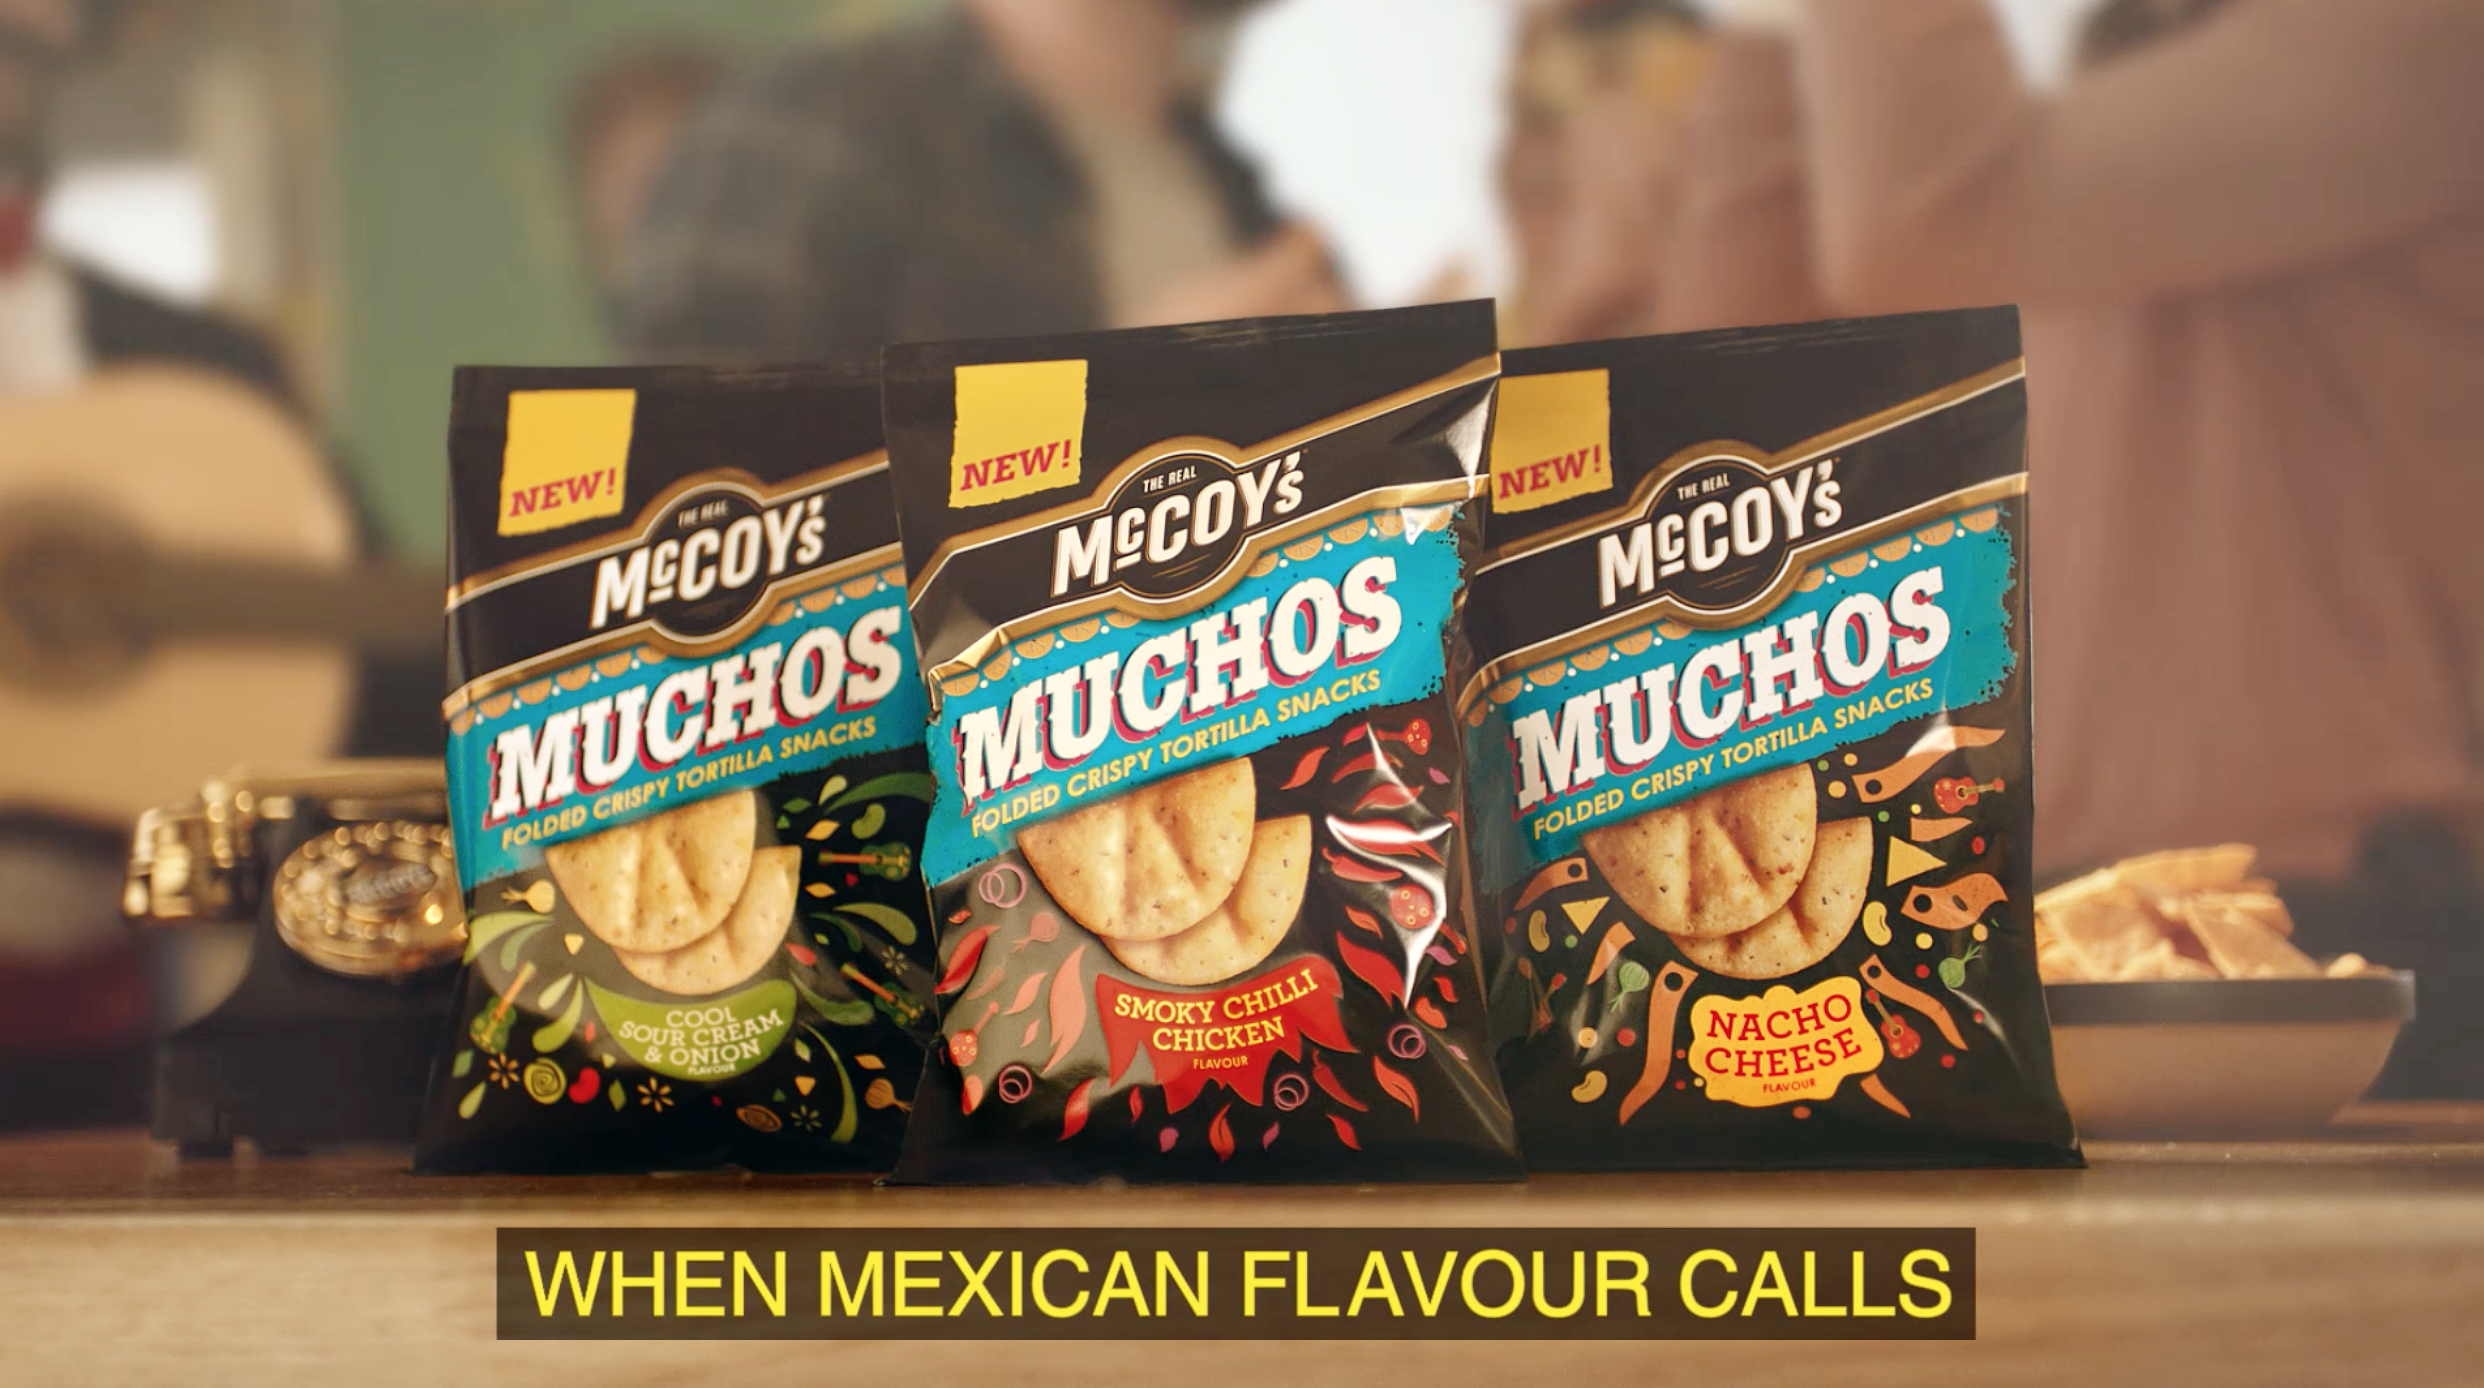 KP Snacks launch £4 million campaign for new Mccoy’s Muchos